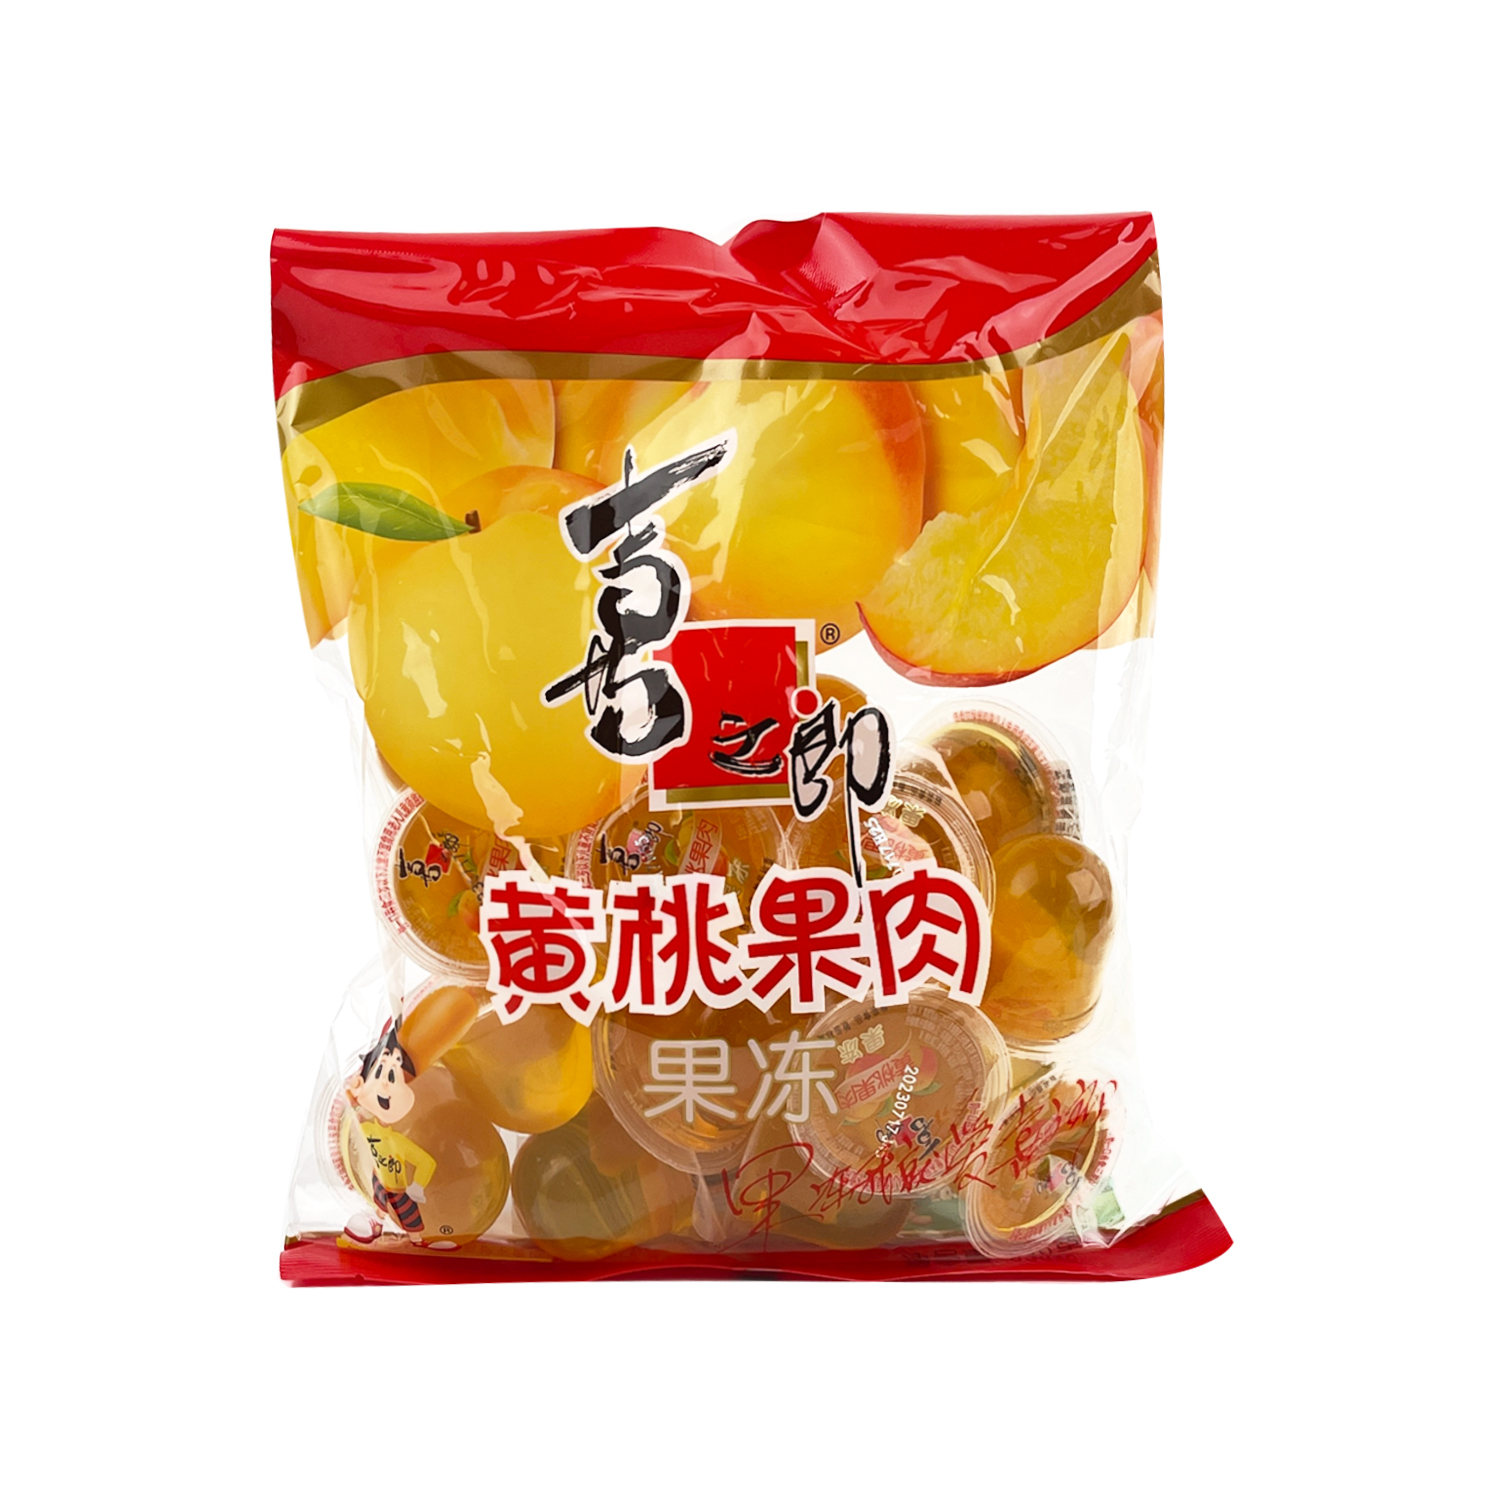 Strong Yellow Peach Jelly 630g-eBest-Confectionery,Snacks & Confectionery